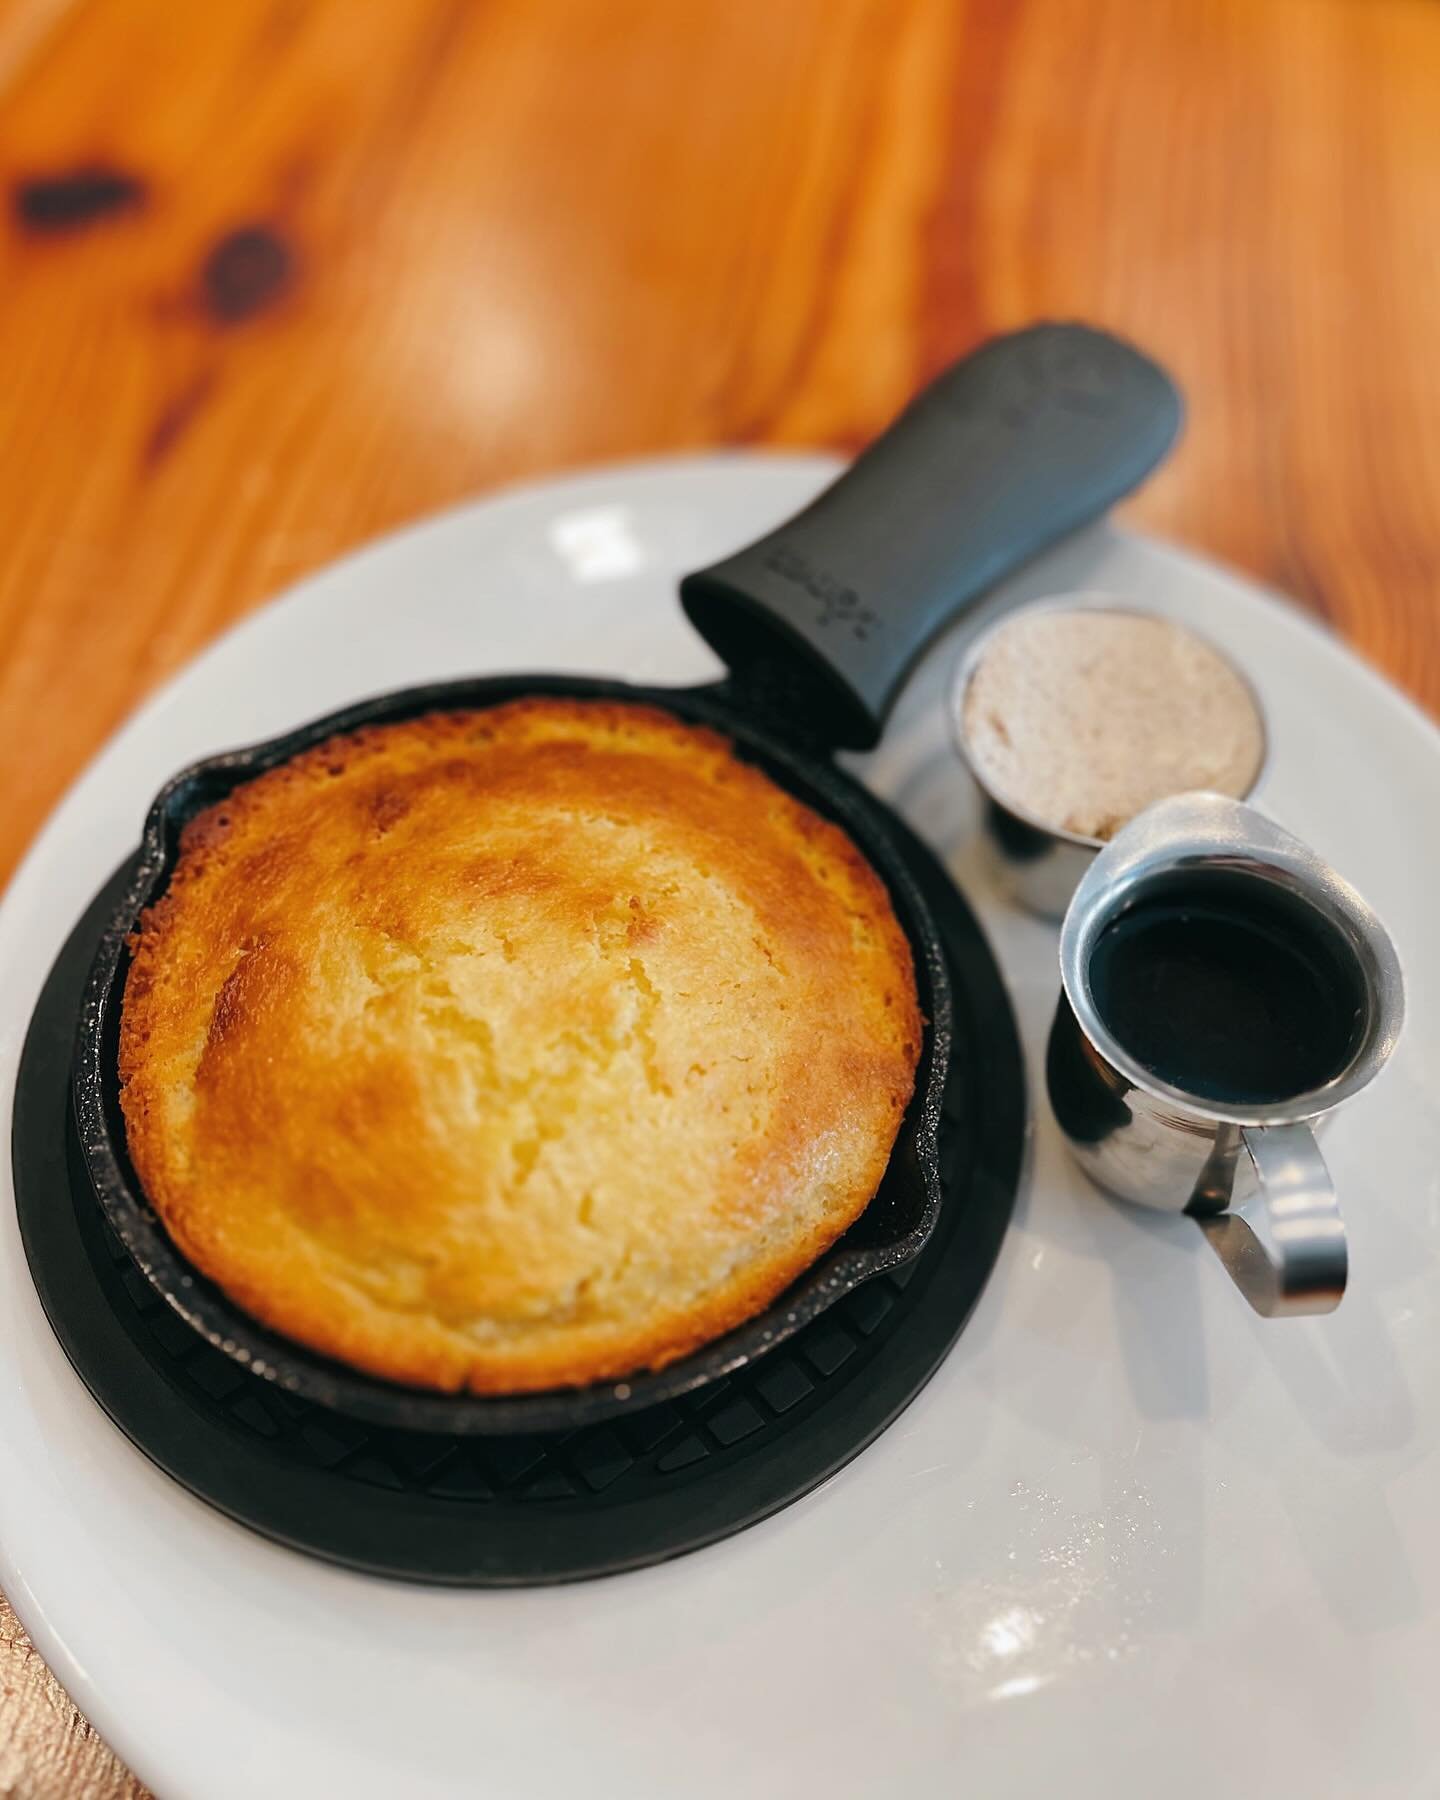 Stop In &amp; Enjoy Our Famous Skillet Cornbread with Maple Bourbon Glaze for a Taste You Won&rsquo;t Forget! 🍽 Open 11AM to 9PM!